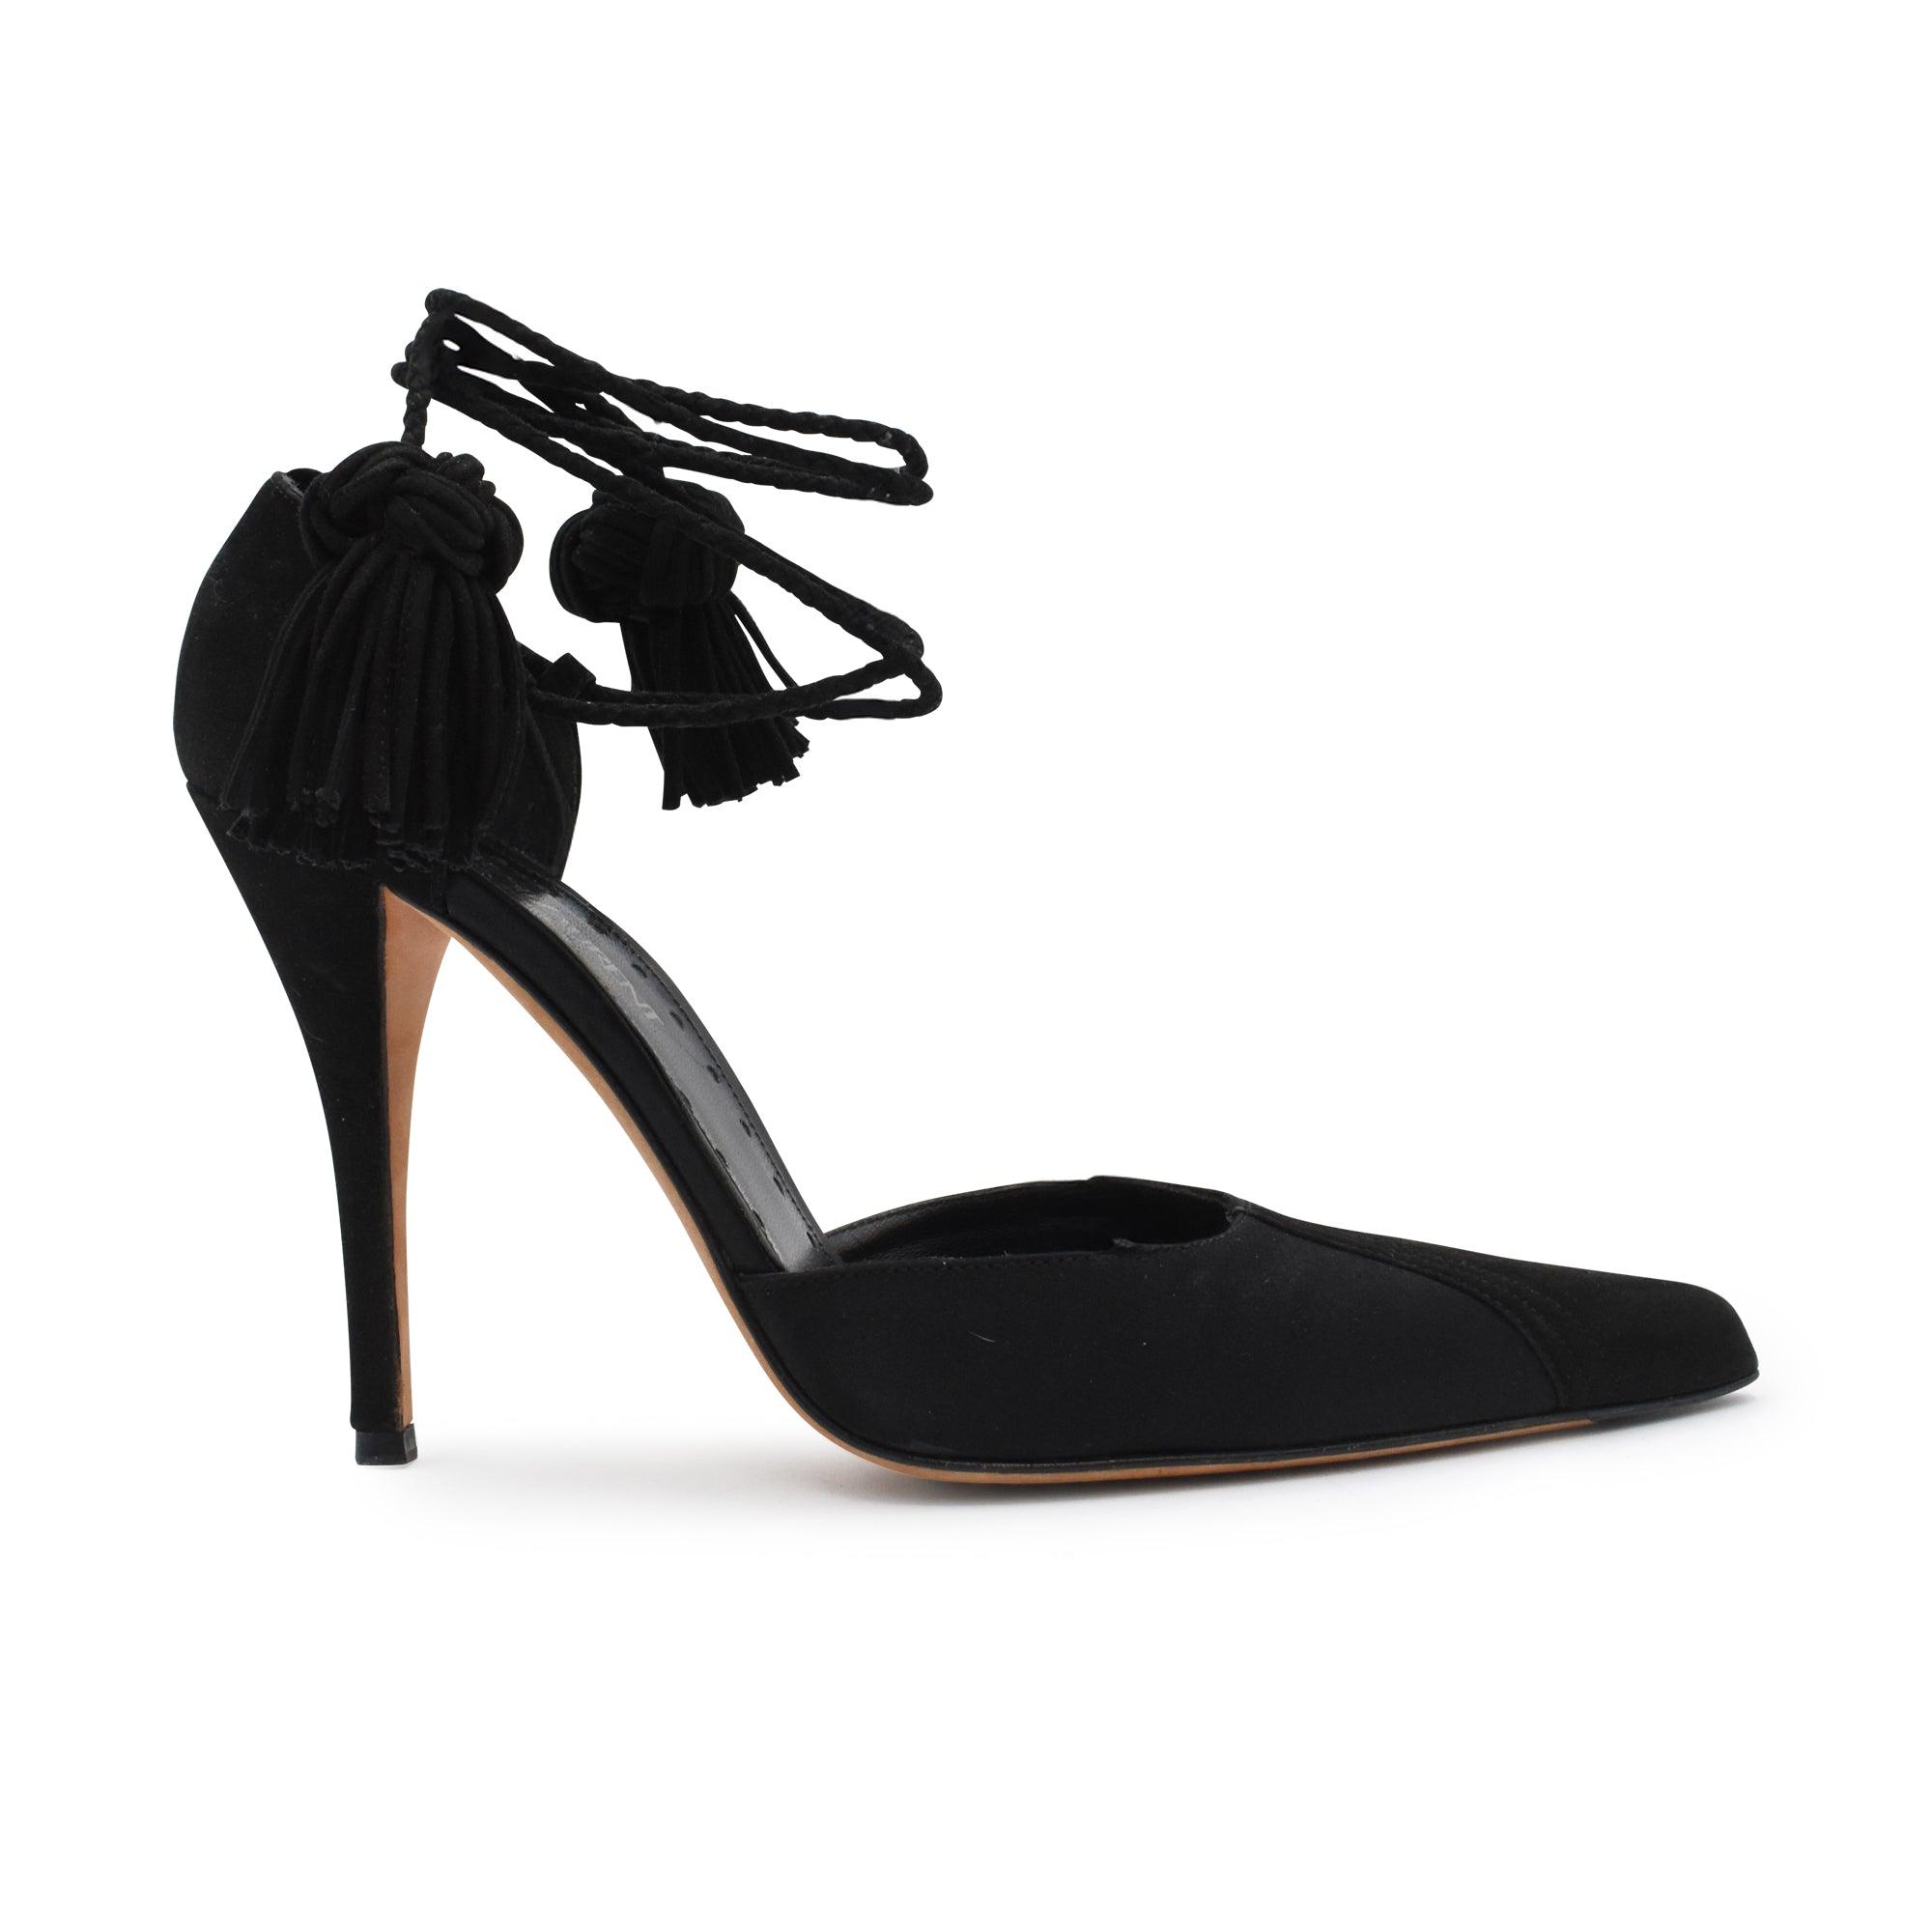 Yves Saint Laurent Heels - 38 - Fashionably Yours